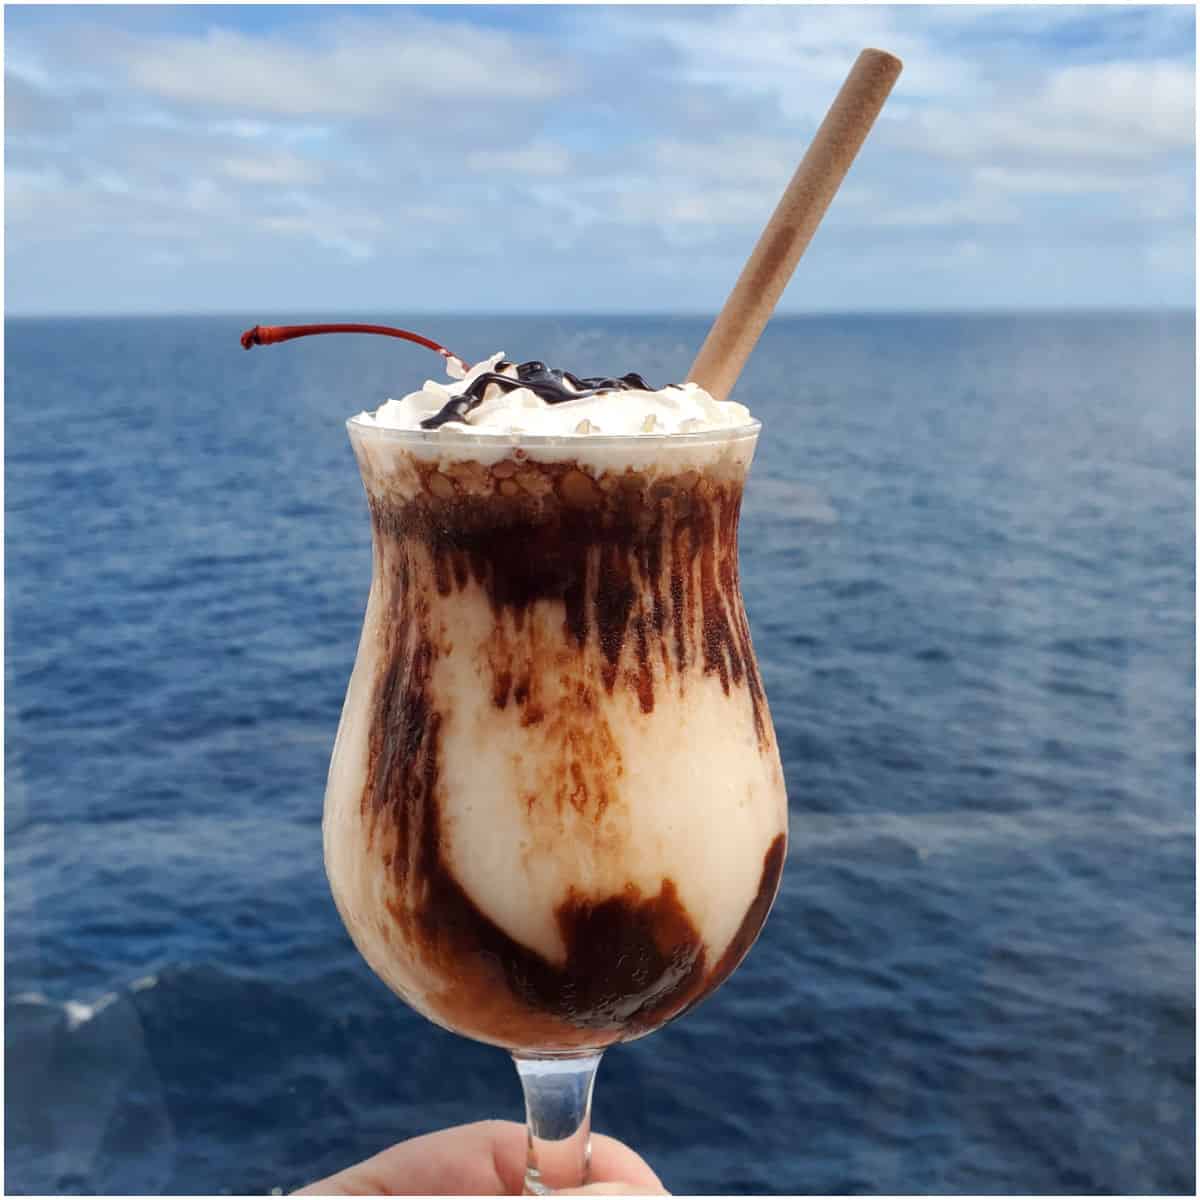 Mocha Chocolate Getaway cocktail being held with a view of the ocean